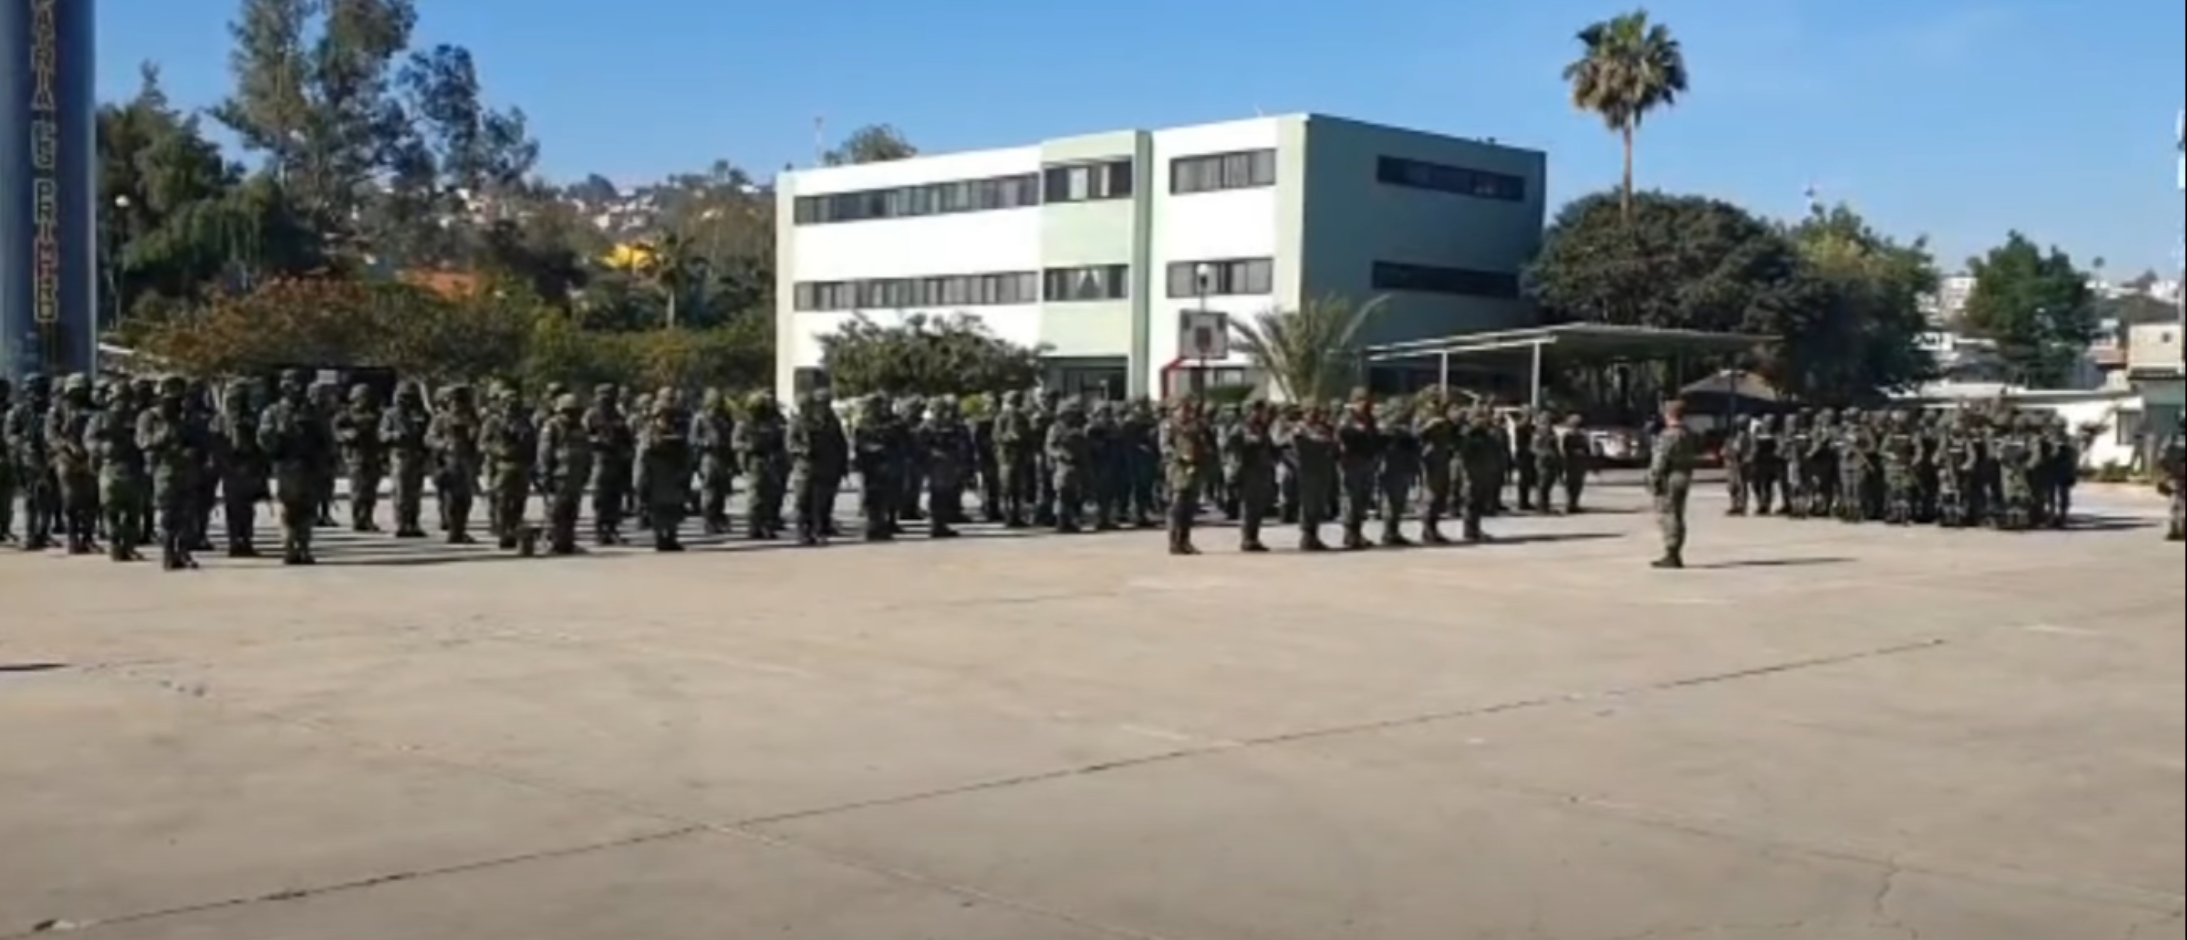 REPORT: 400 Mexican Soldiers Deployed In Tijuana To Combat Organized ...